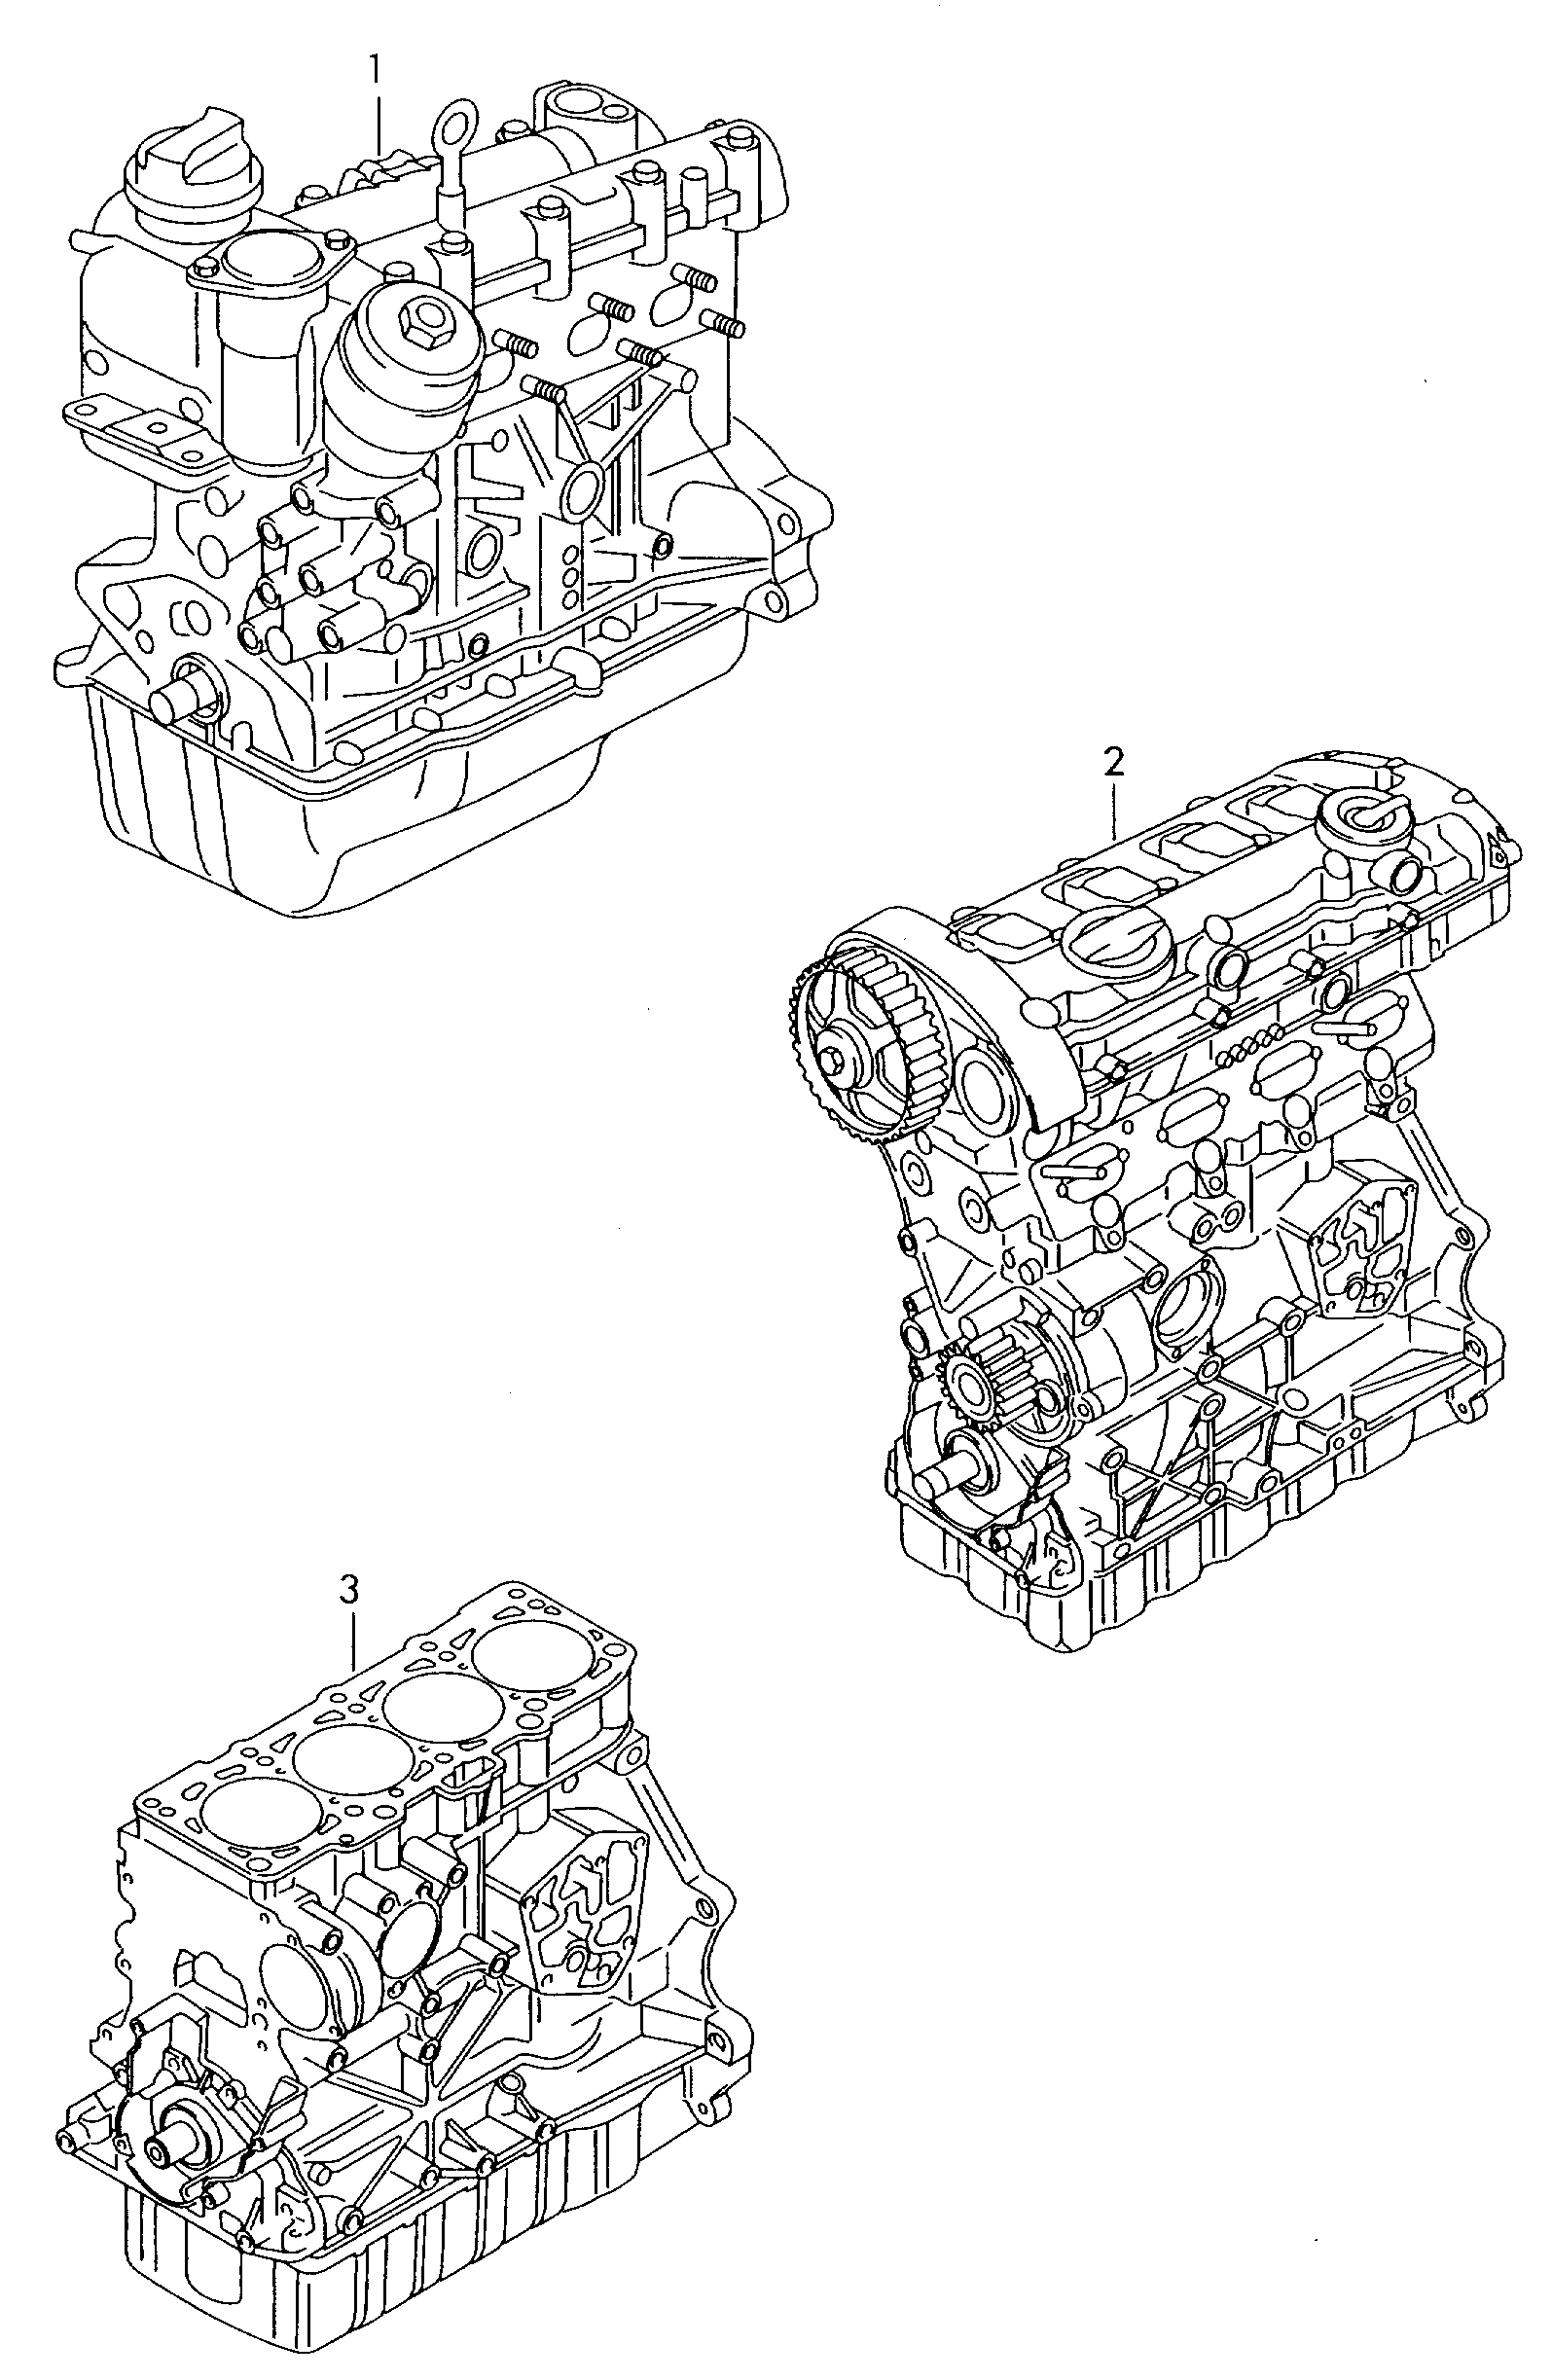 short engine with crankshaft,<br>pistons, oil pump and oil sump  - Caddy - cad